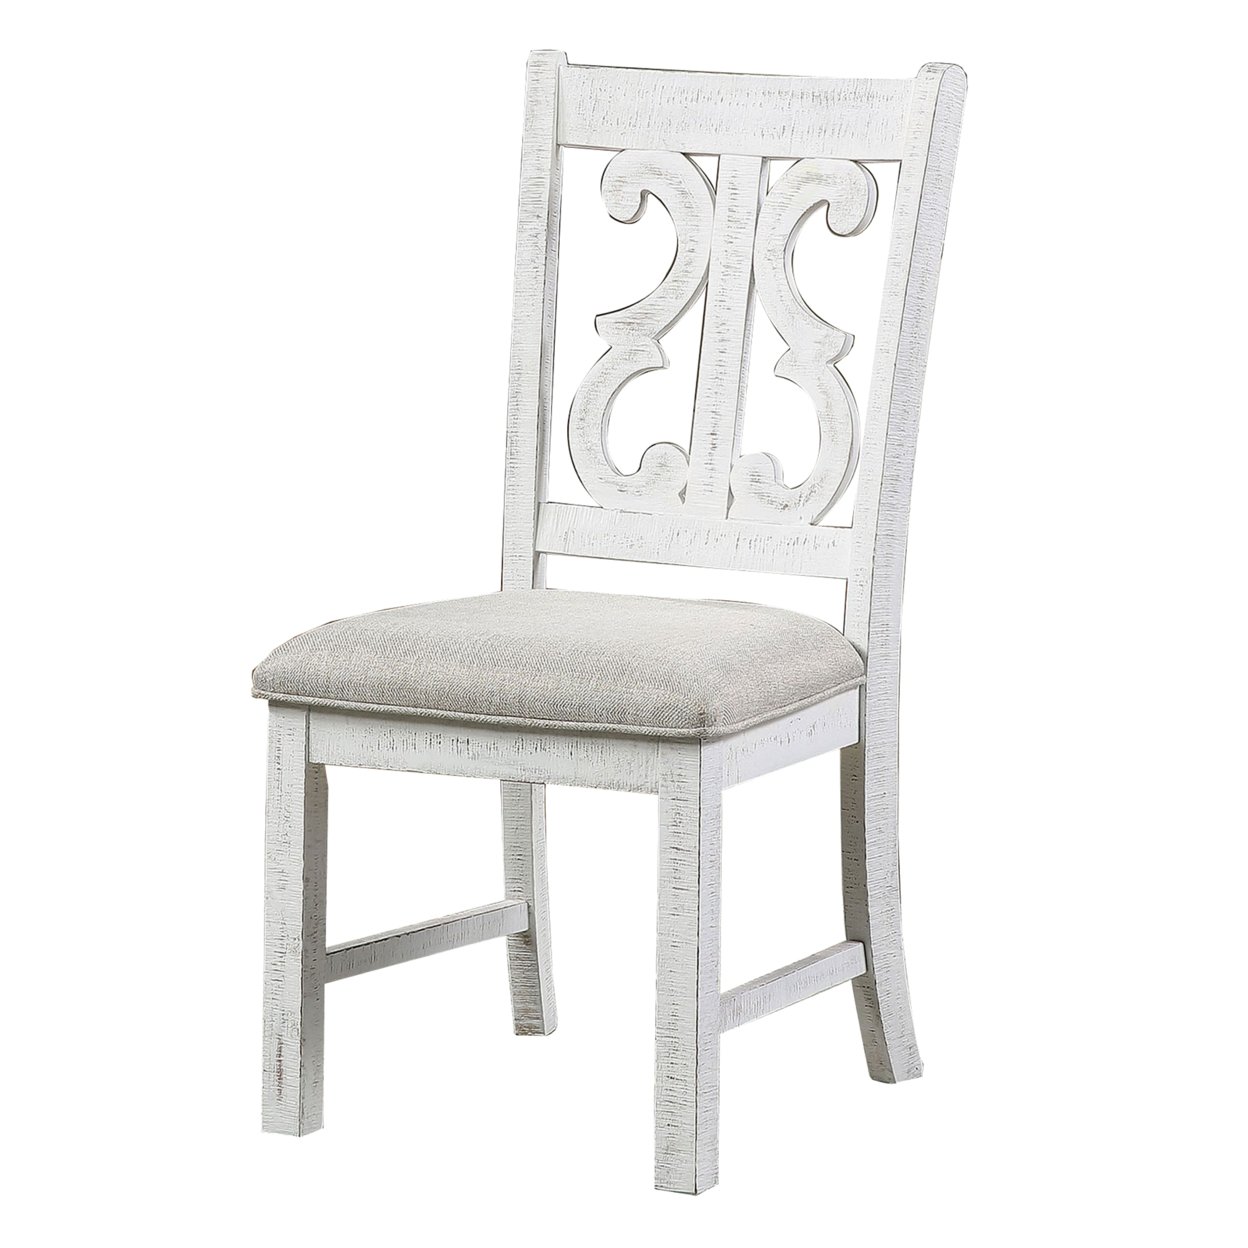 Open Scroll Back Wooden Side Chair With Padded Seat, Set Of 2, White- Saltoro Sherpi